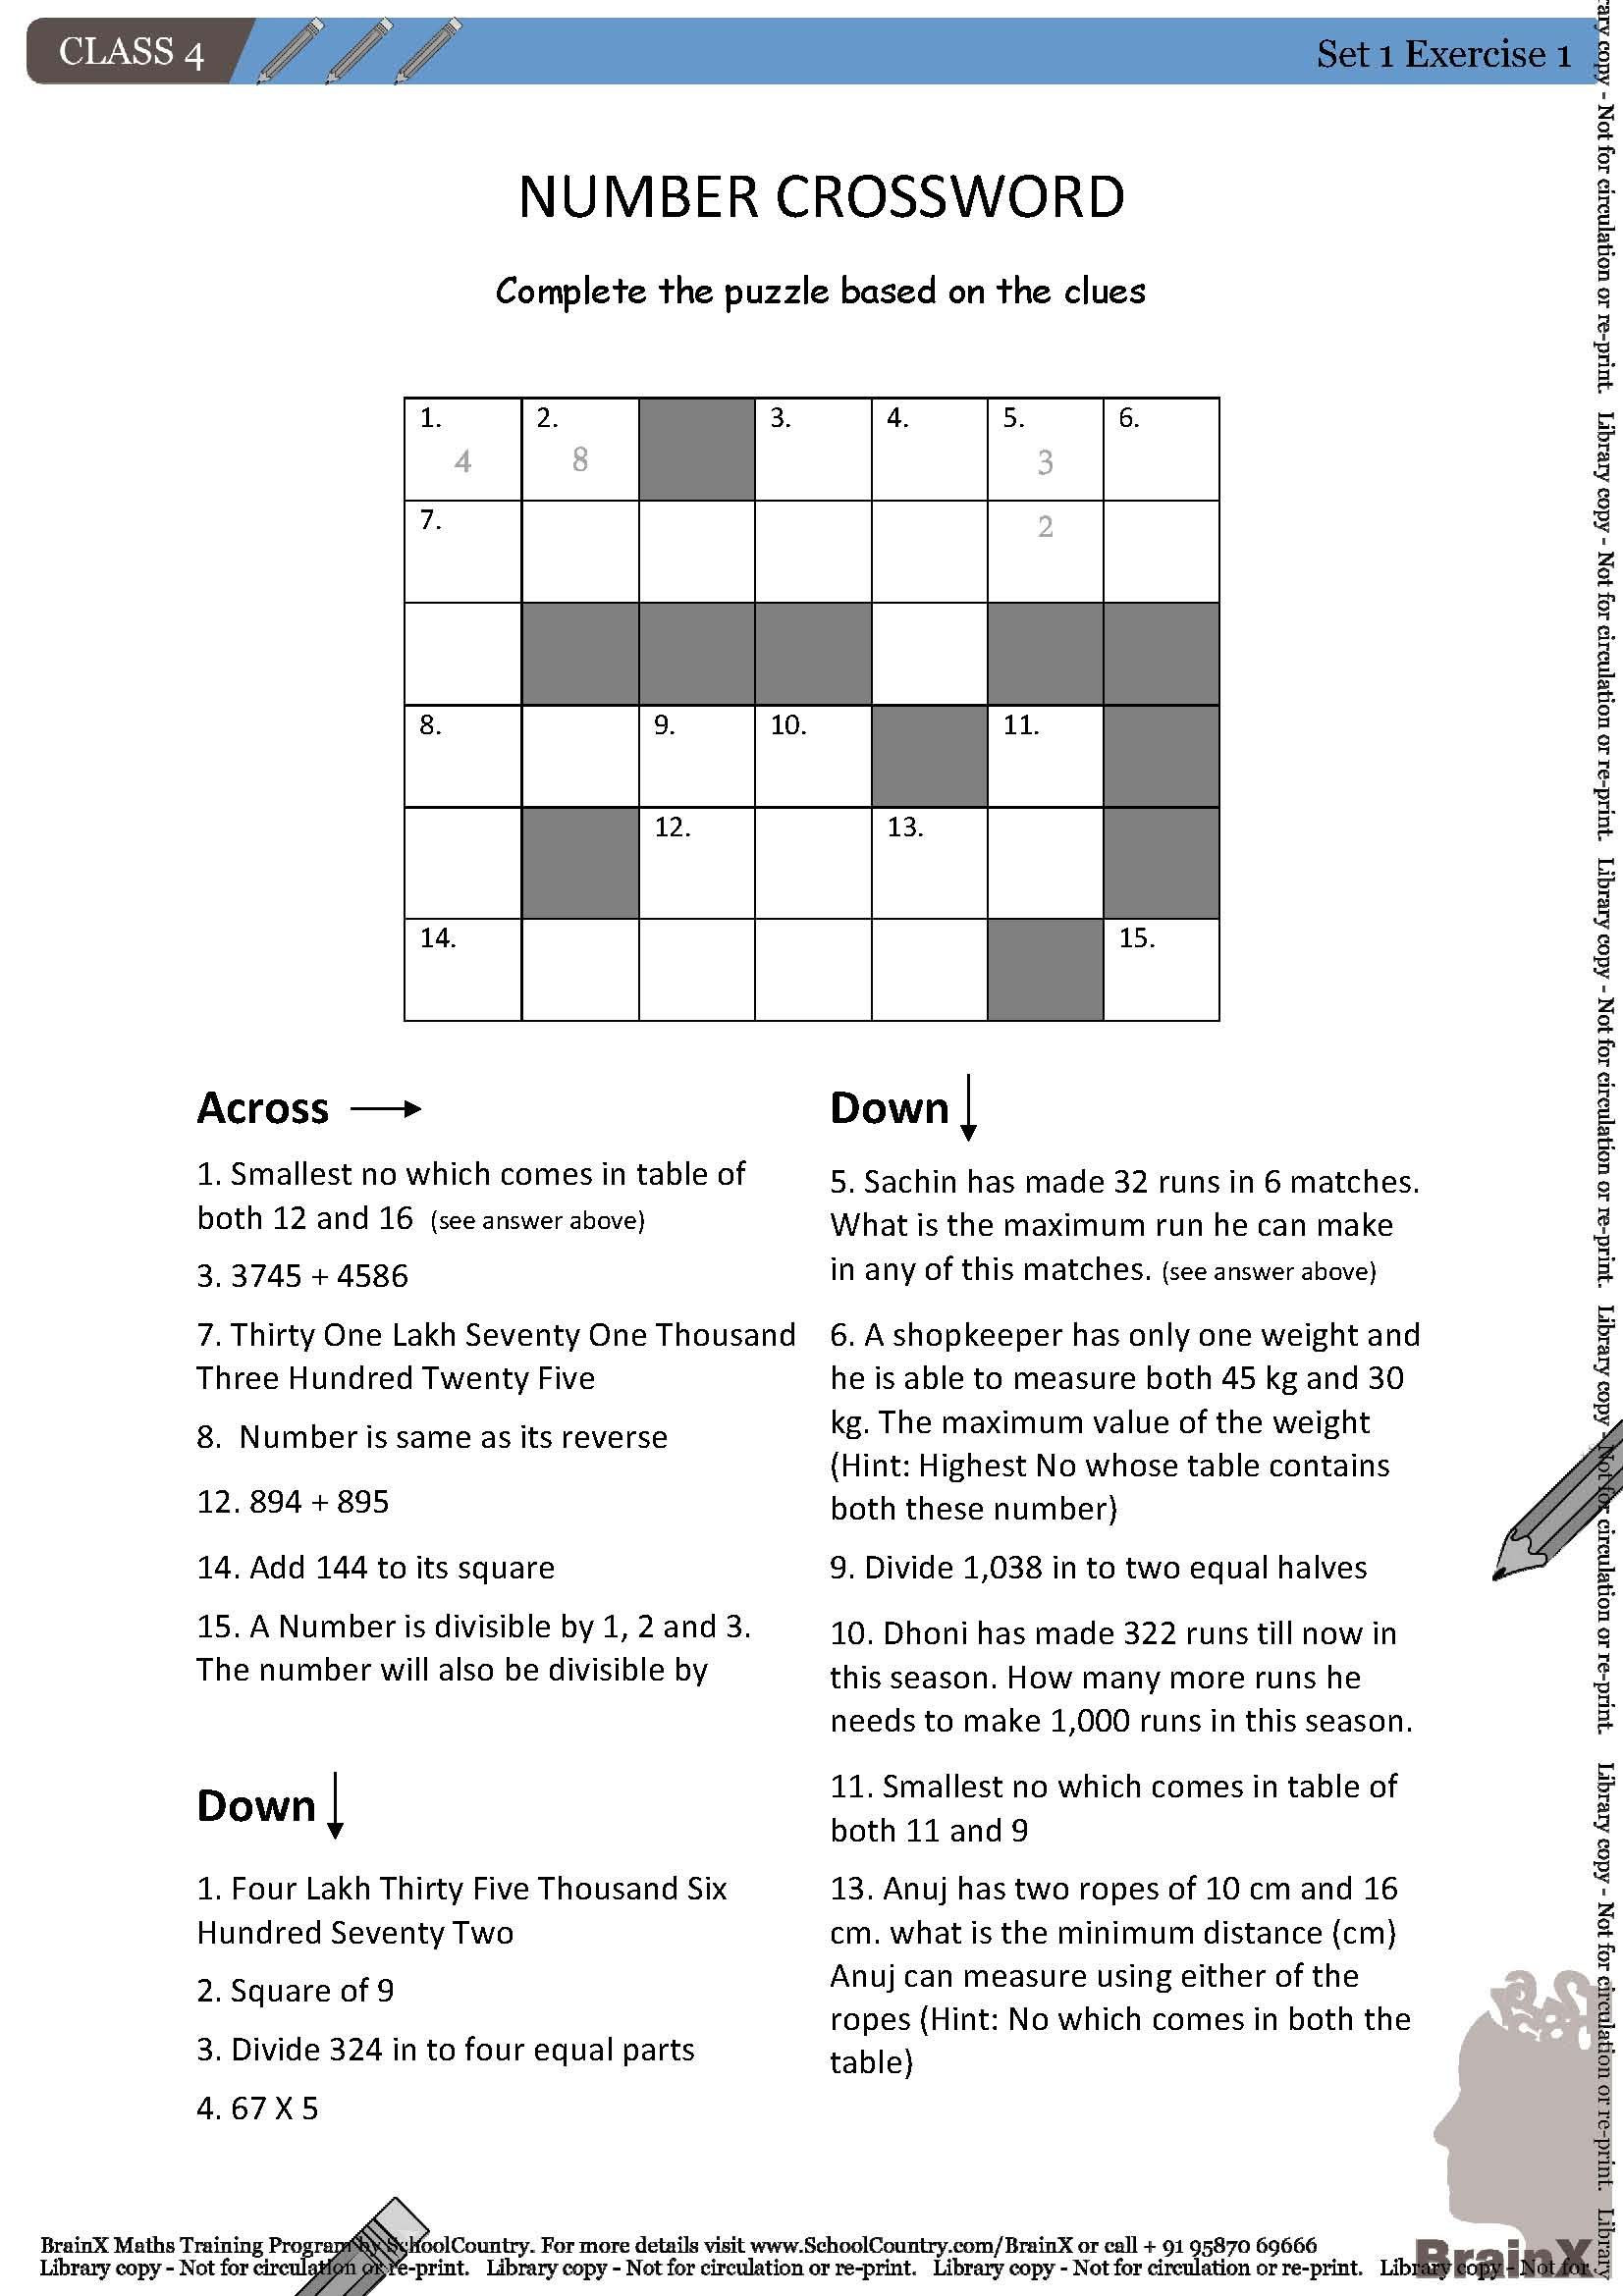 Proportional and Nonproportional Relationships Worksheet Try This Amazingly New Version Of &quot;number Crossword&quot; Number